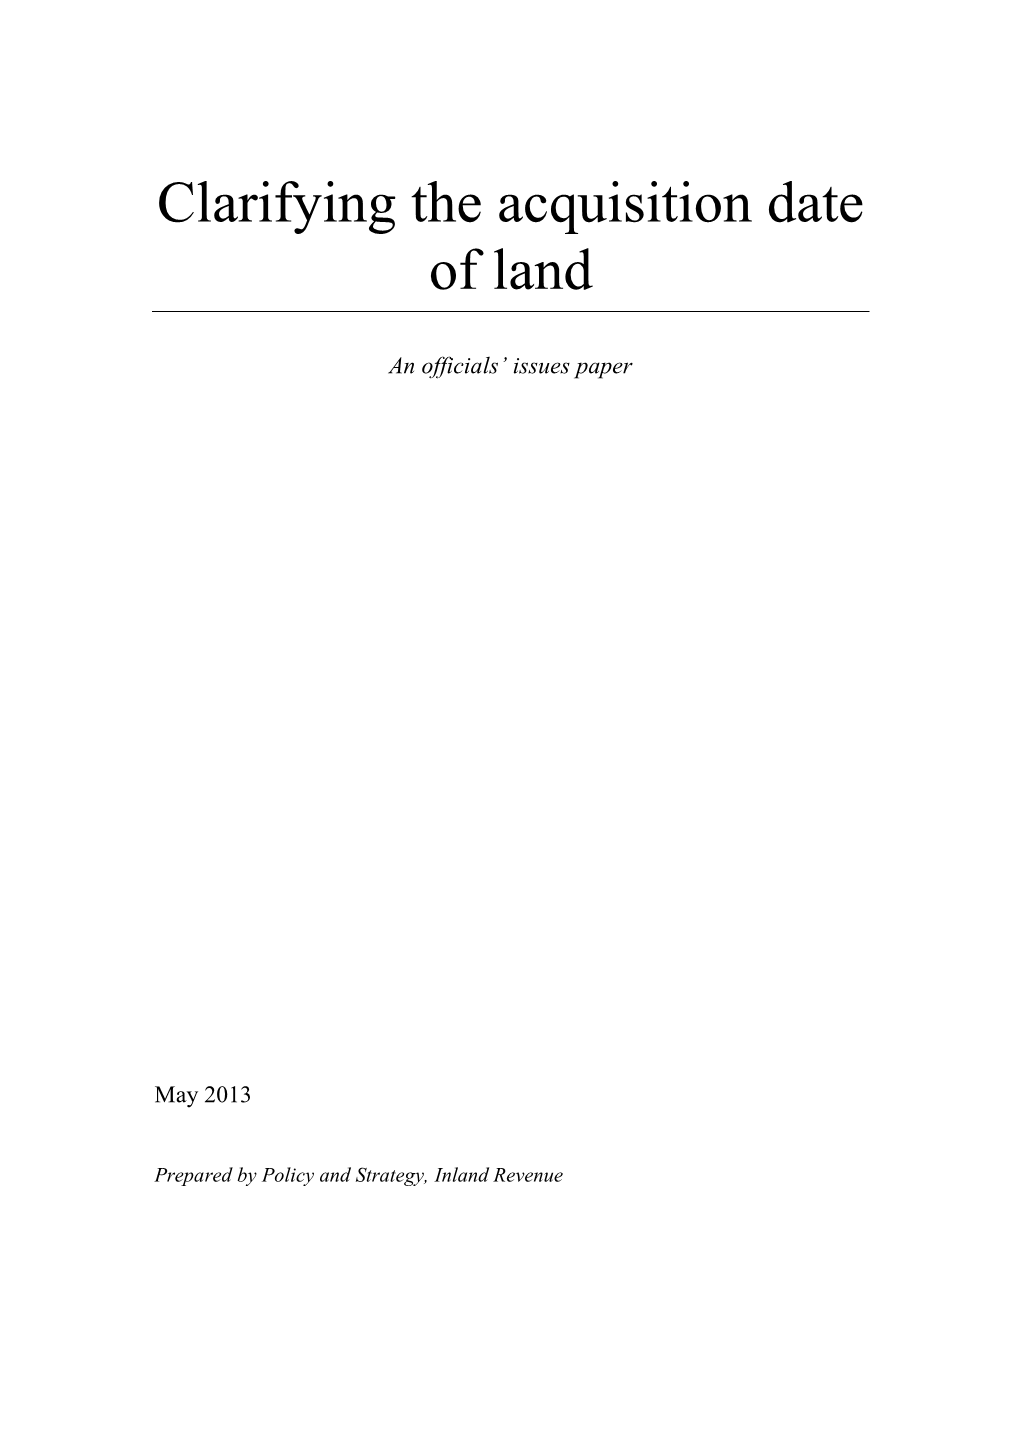 Clarifying the Acquisition Date of Land